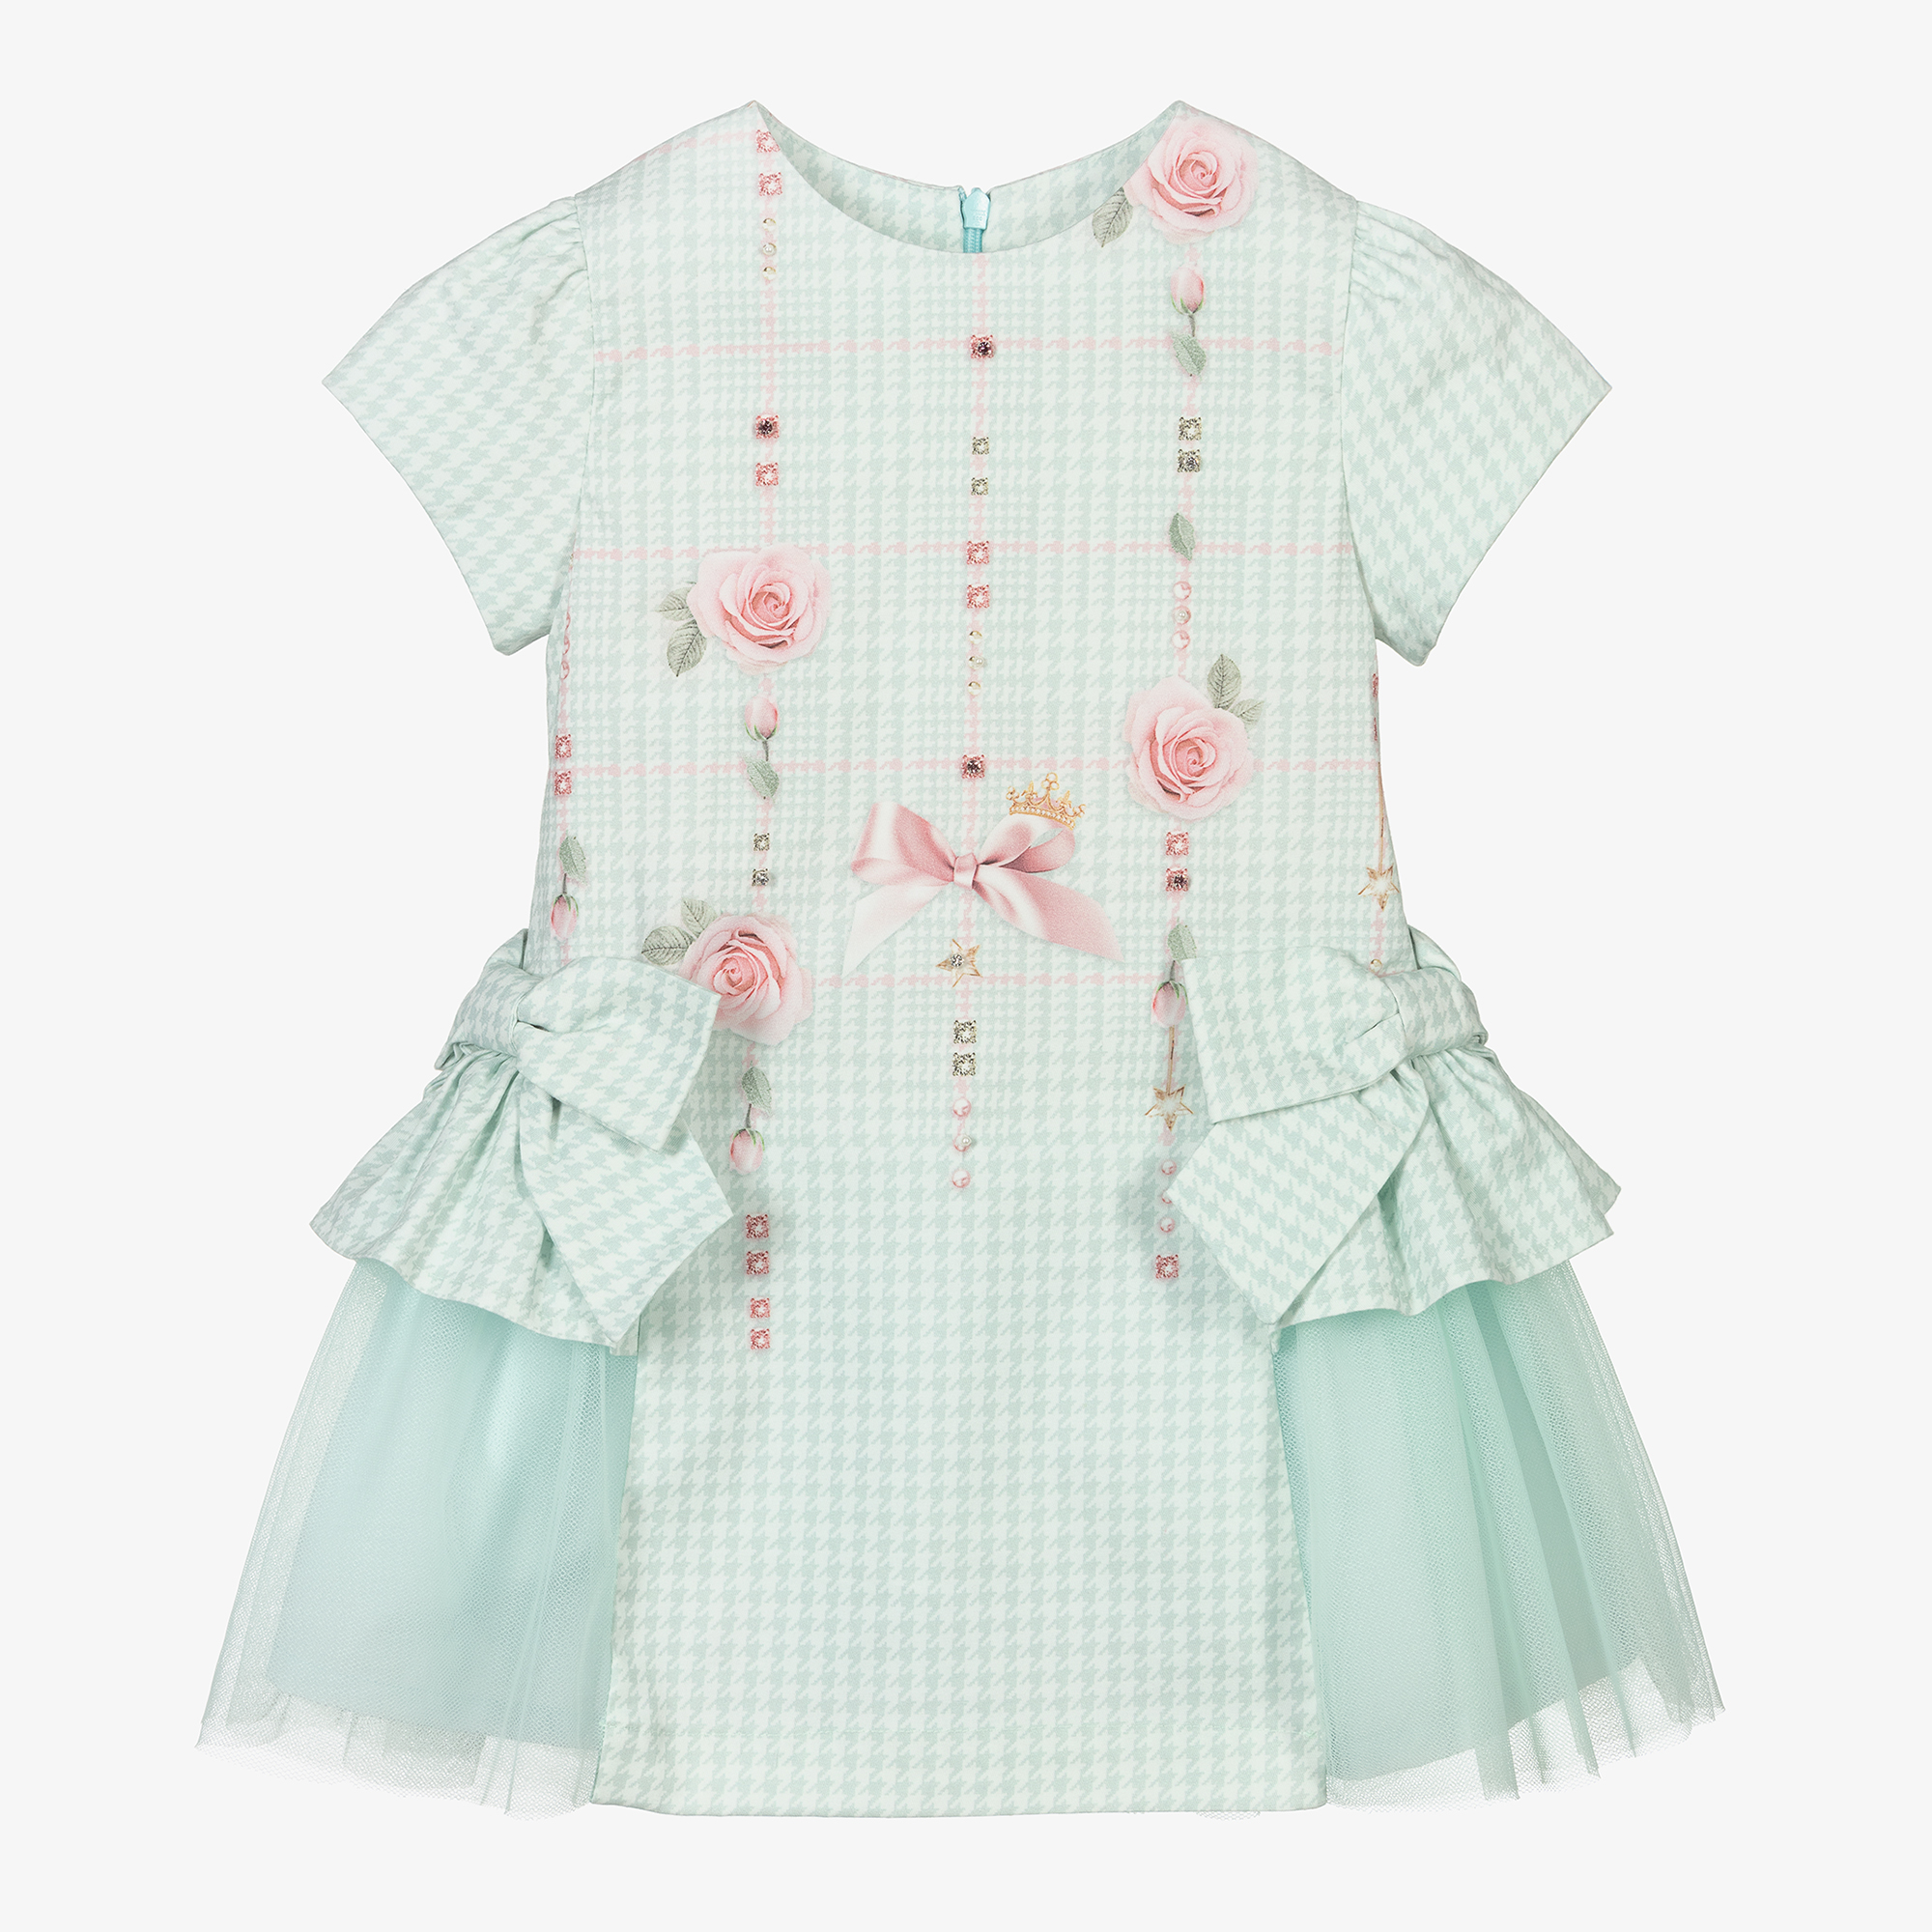 Lapin House - Girls Houndstooth Dress | Outlet